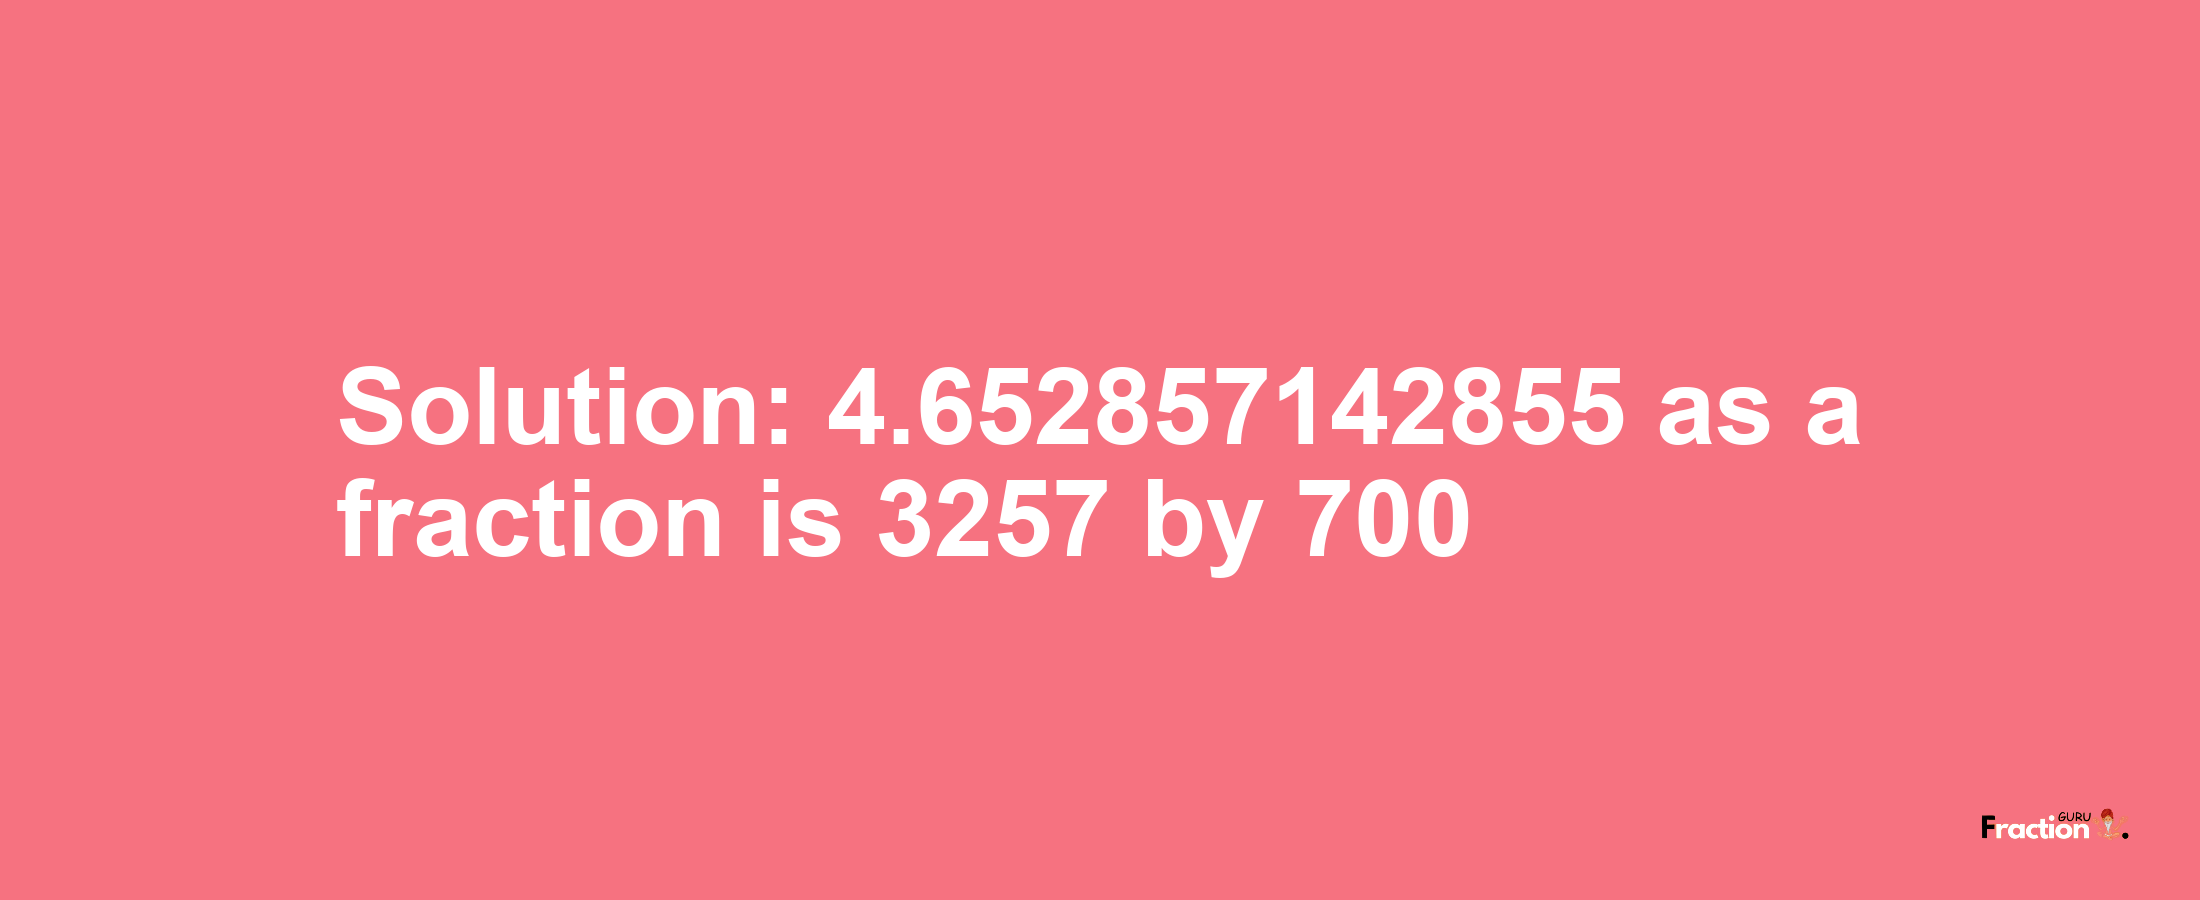 Solution:4.652857142855 as a fraction is 3257/700